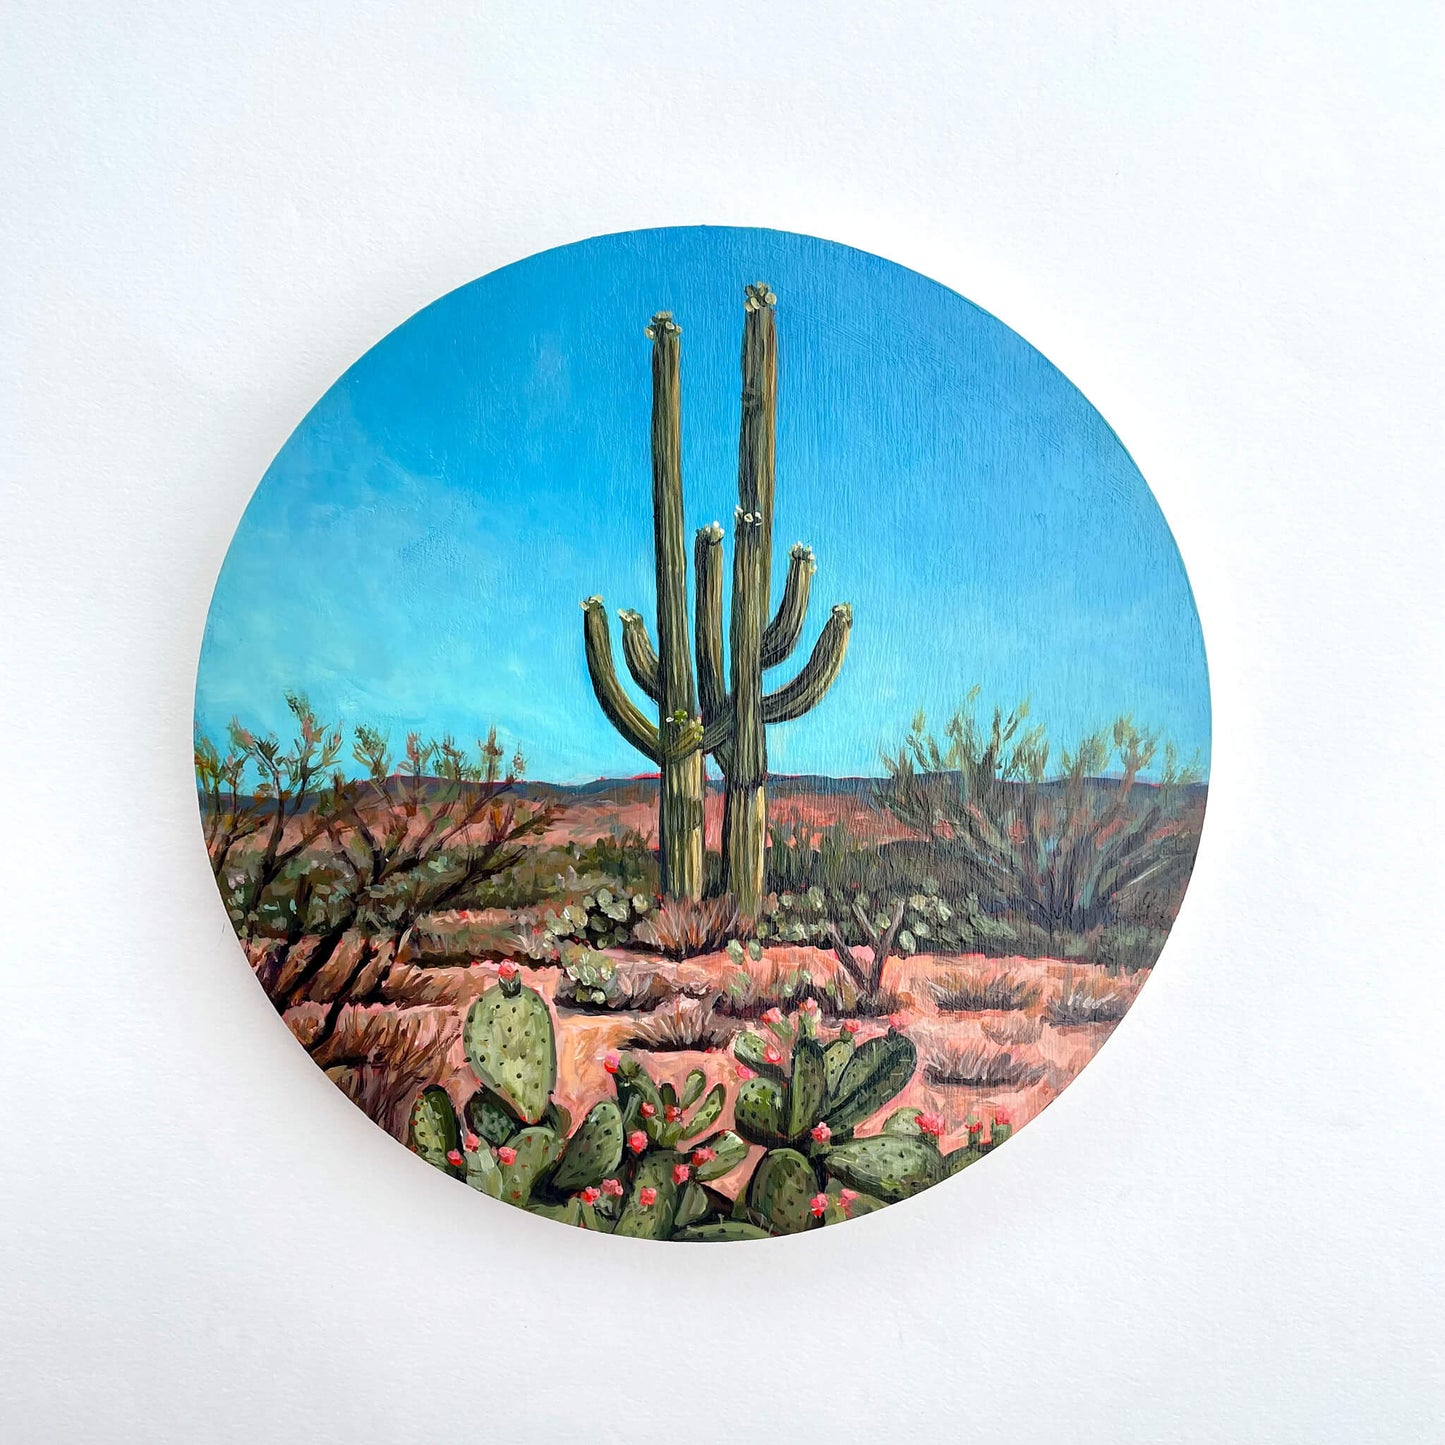 Double Barrel - 8" round painting